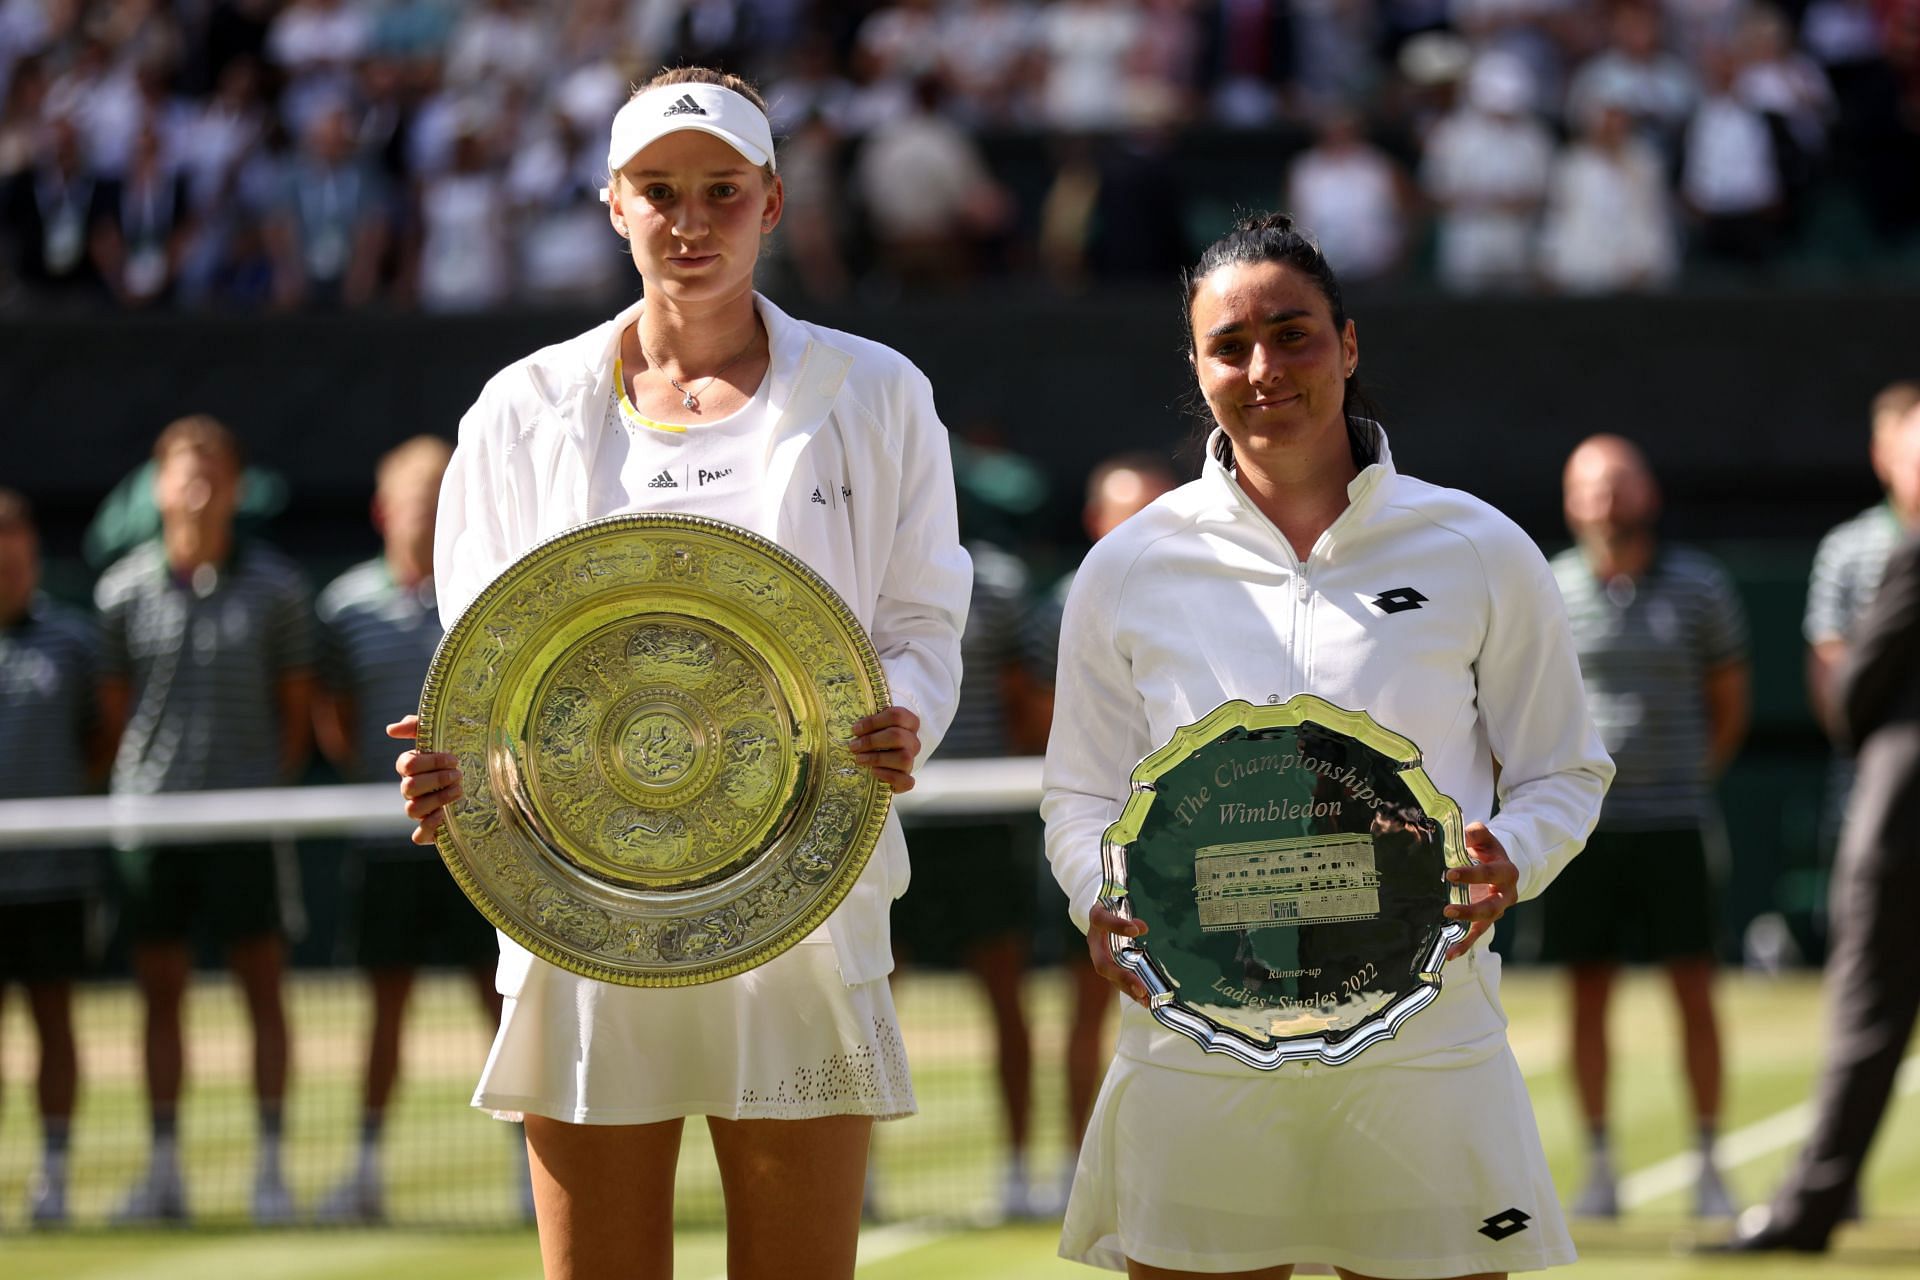 Rybakina and Jabeur with their trophies at The Championships - Wimbledon 2022